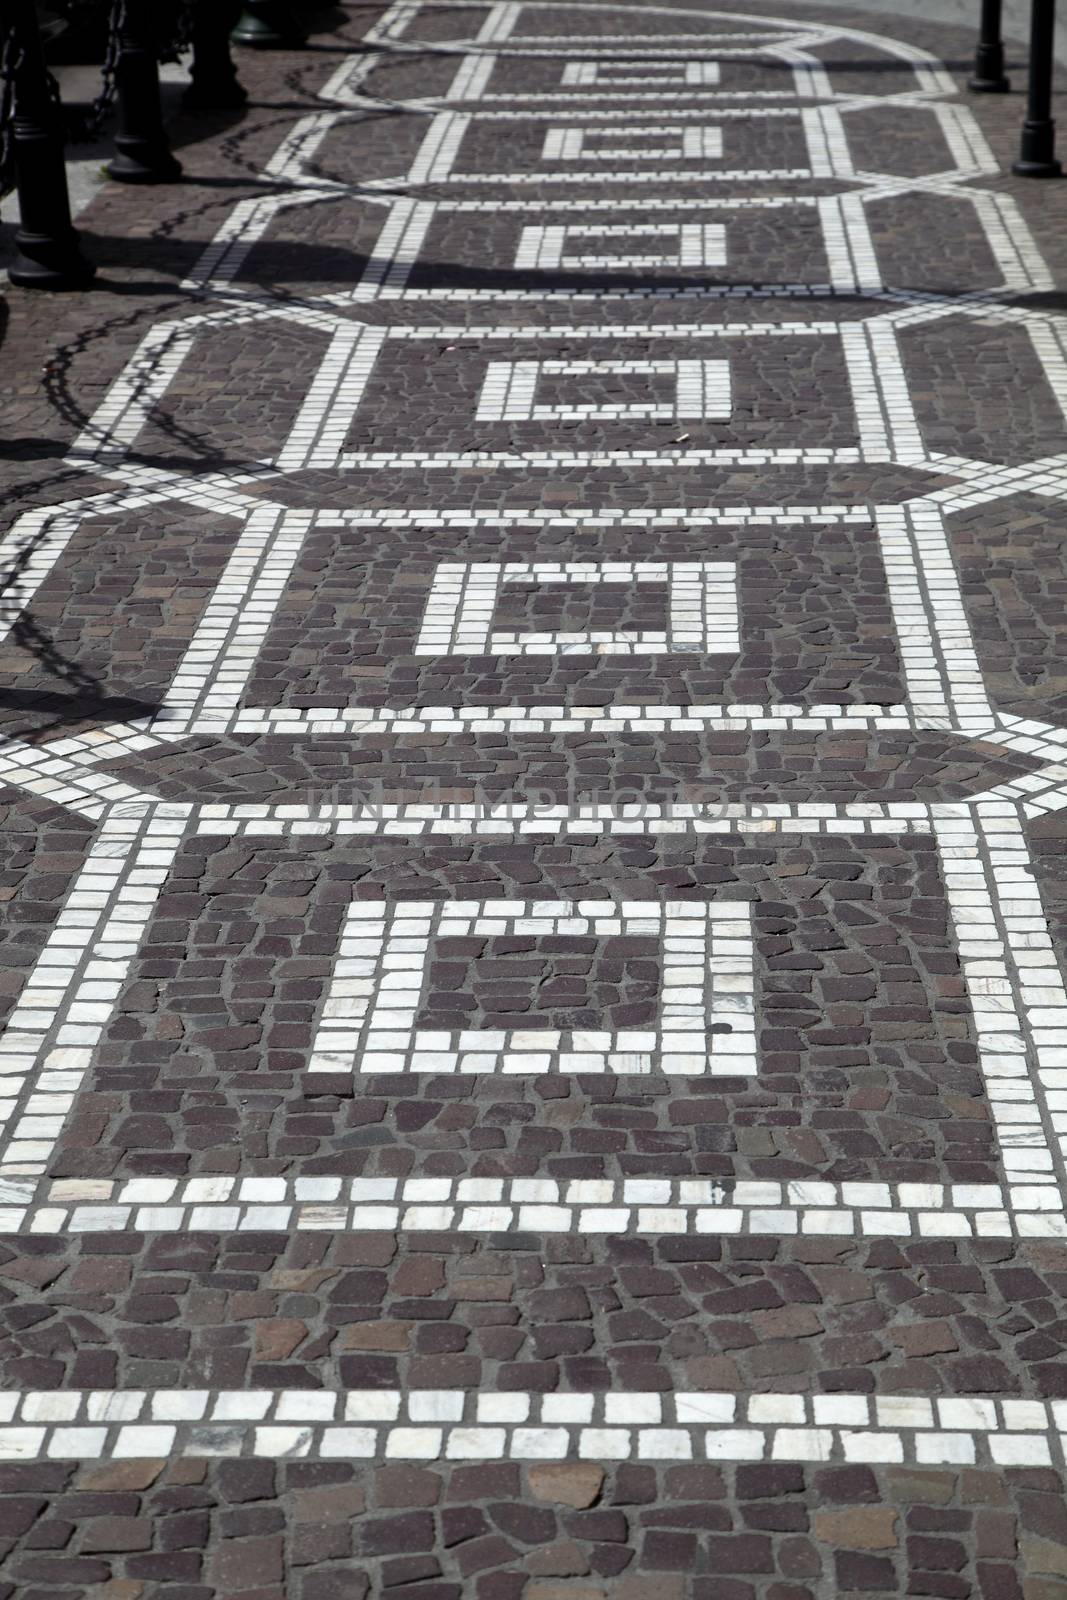 ancient pavement in the form of squares.